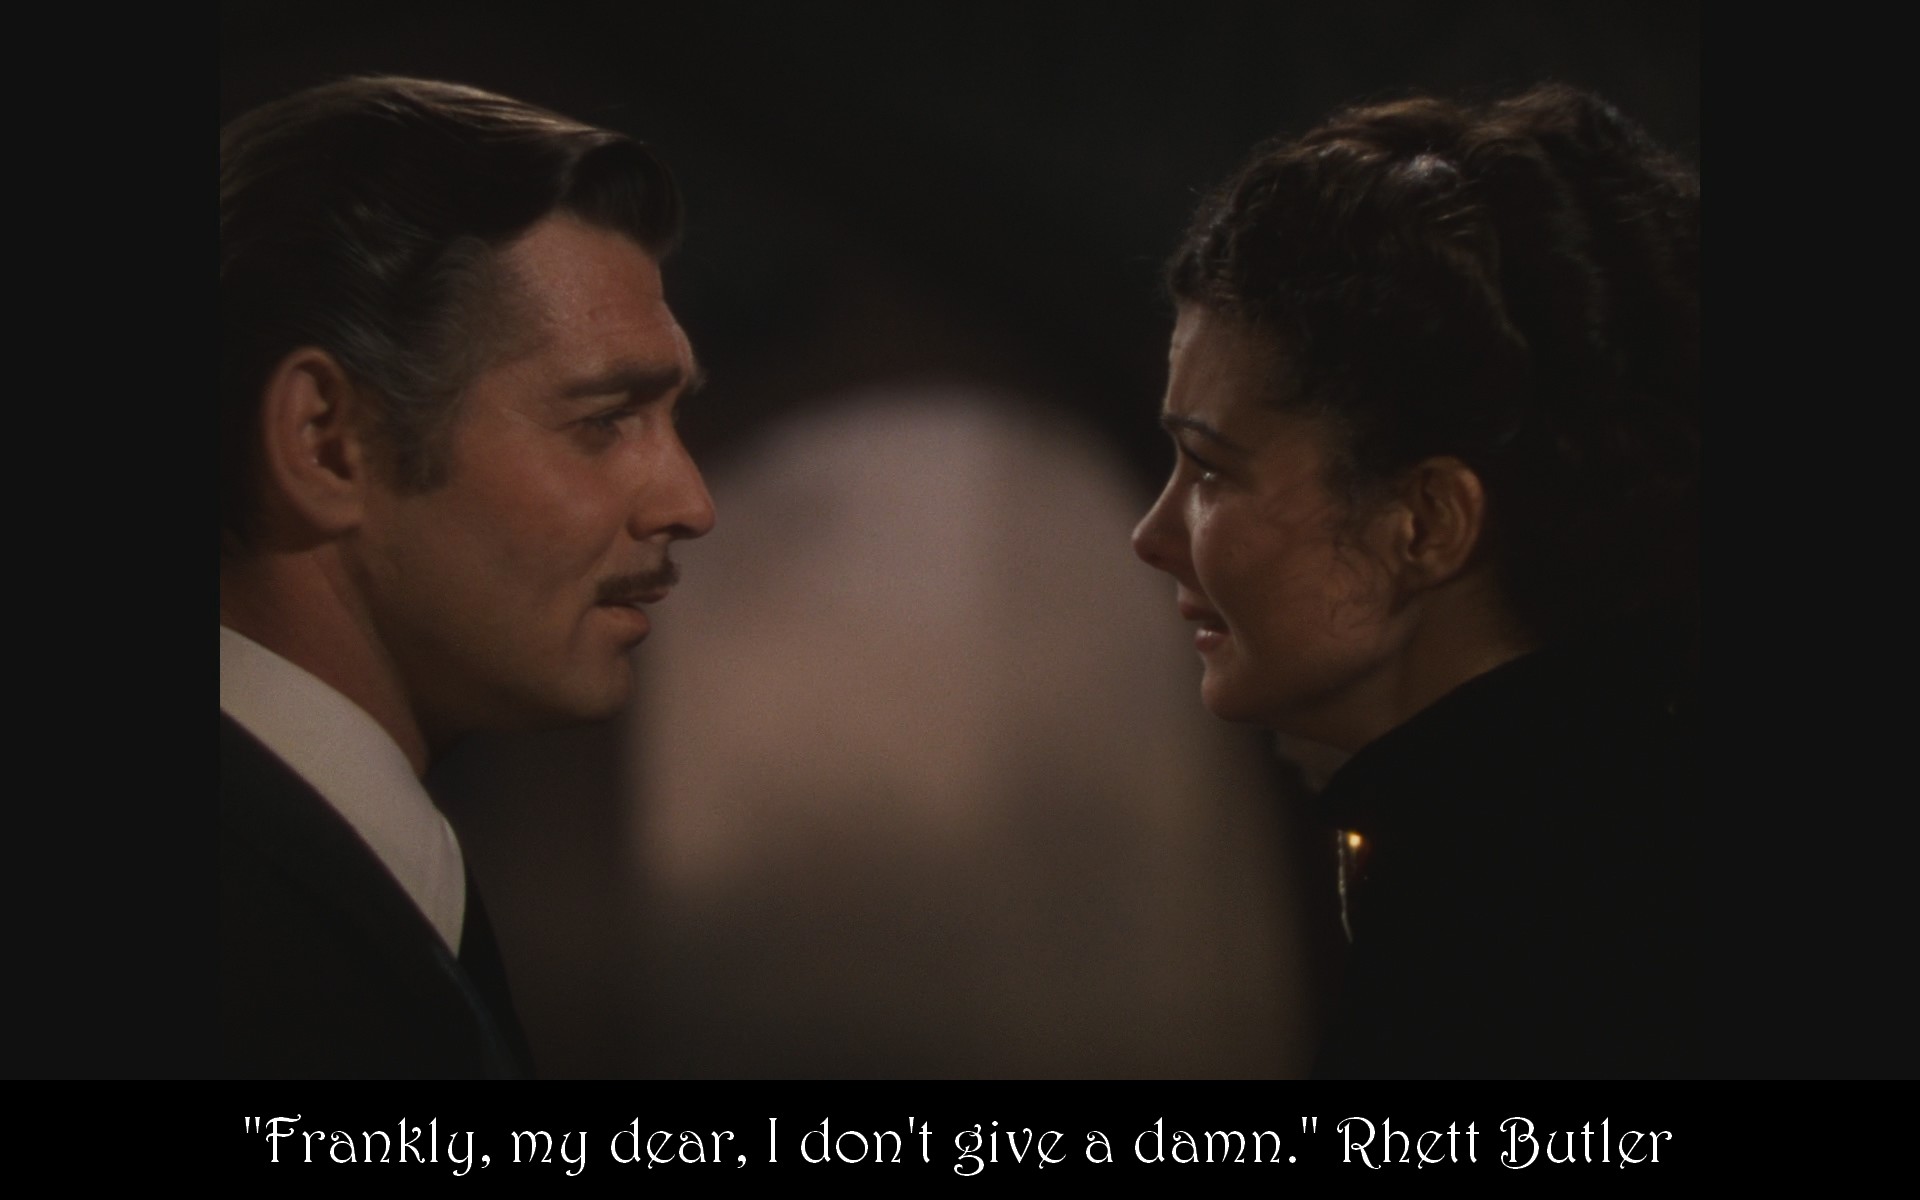 The Godfather 2 Quotes Images Crazy Gallery